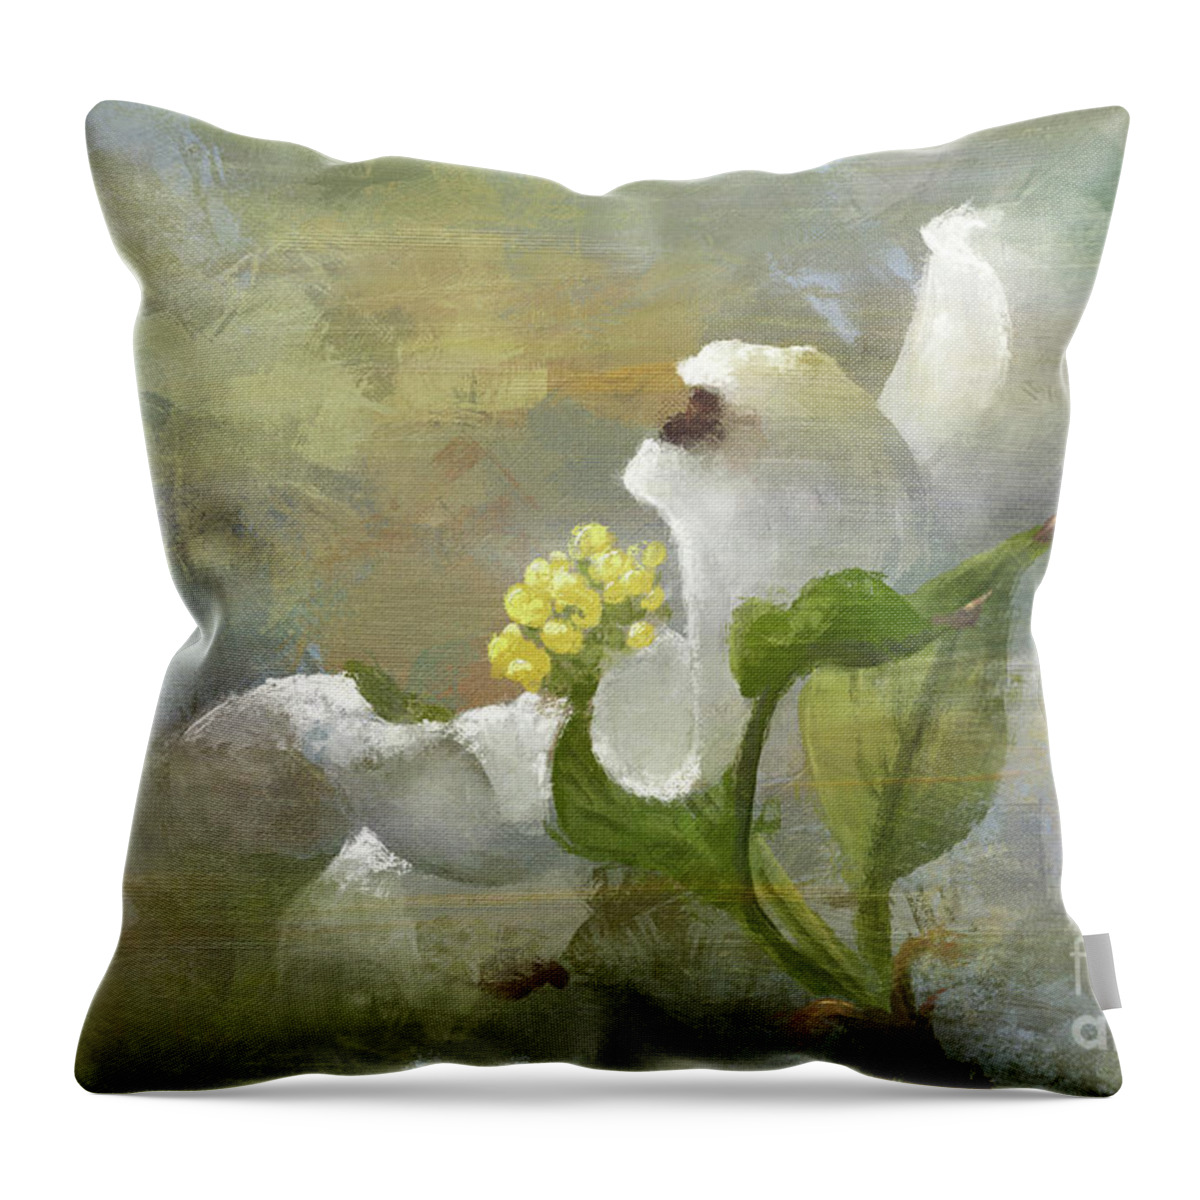 Flower Throw Pillow featuring the digital art A Light That Shines For Me by Lois Bryan